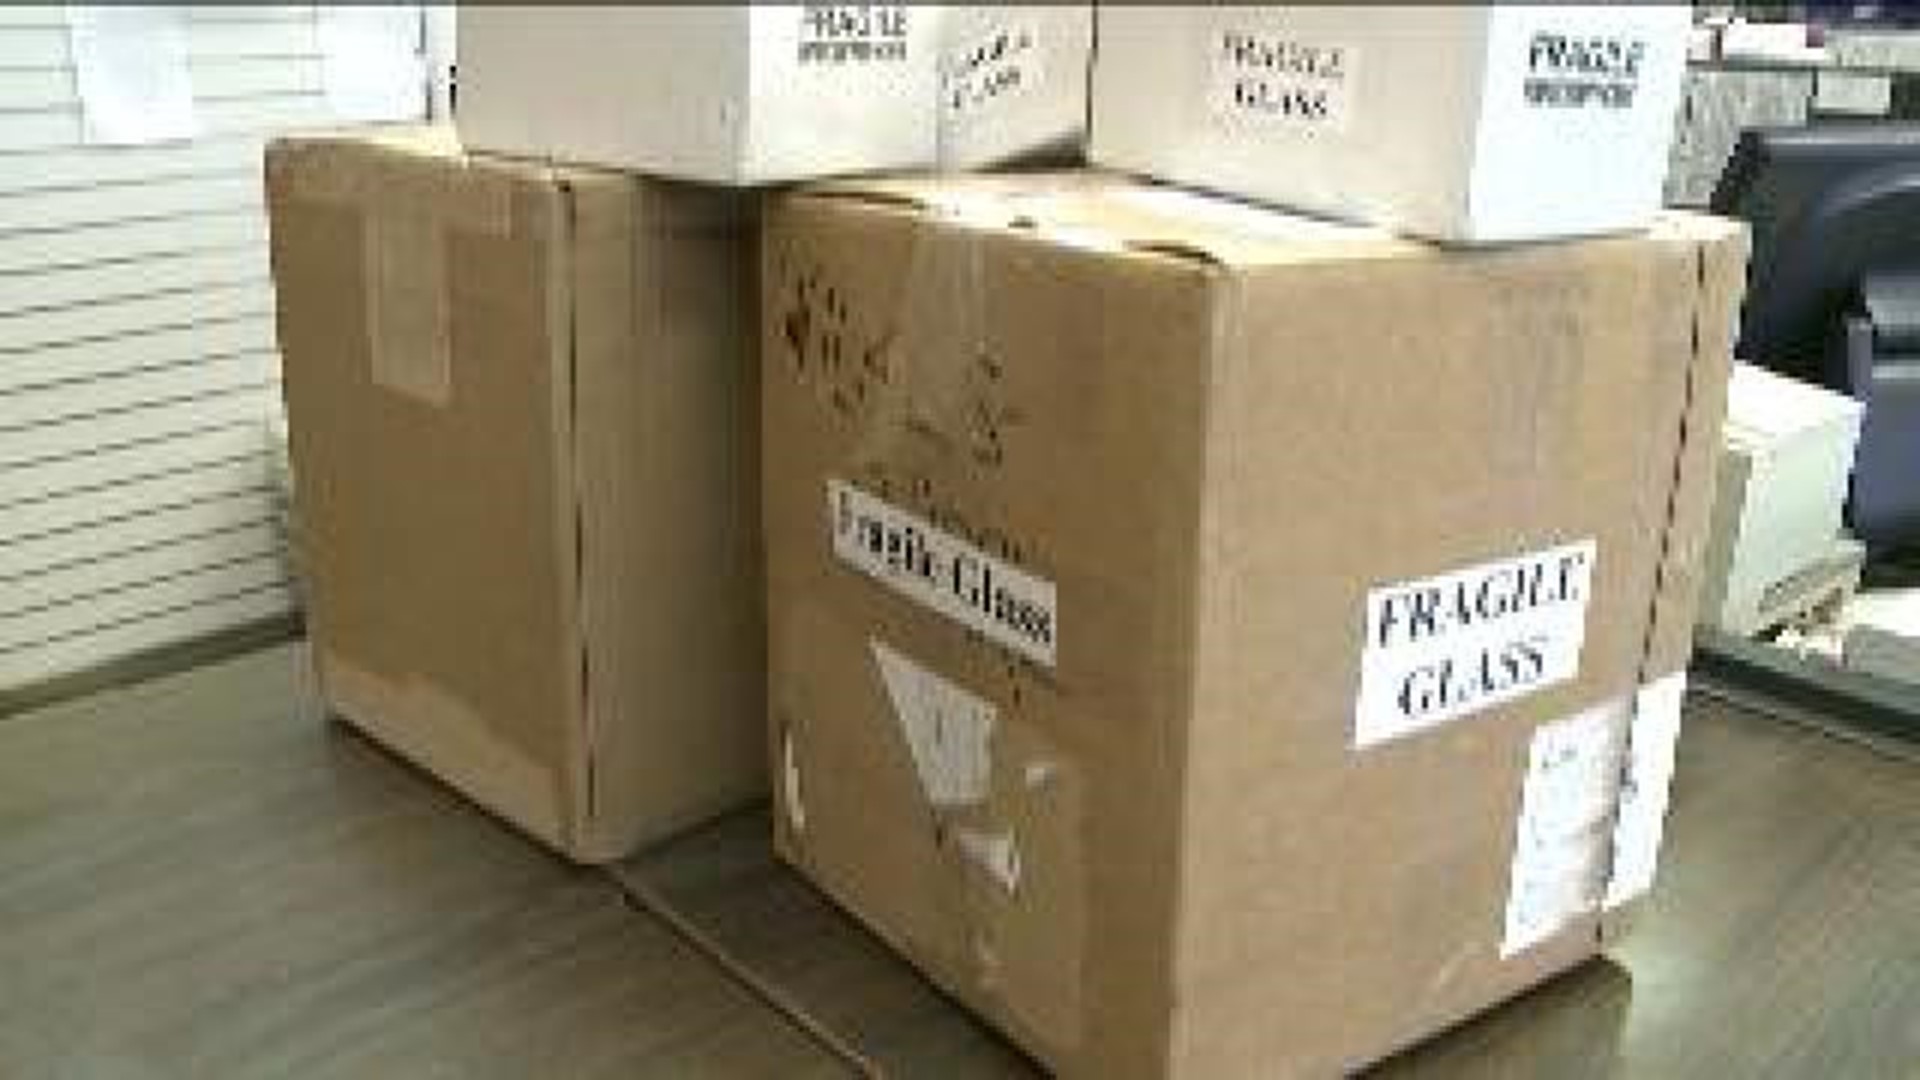 Holiday Shipping Rush Is Underway